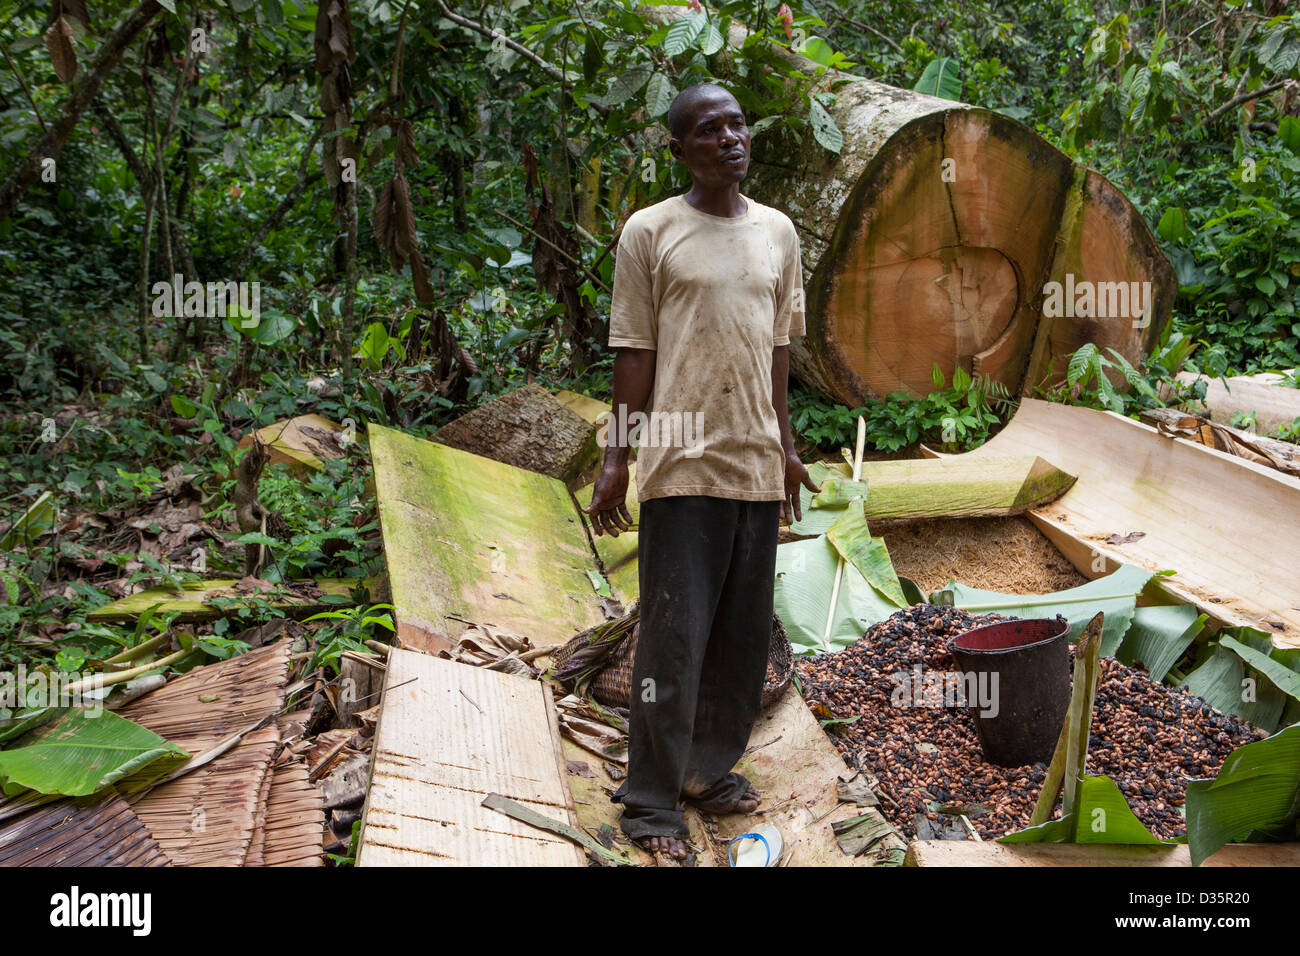 CONGO, 27th Sept 2012: A cacao bean farmer sorting his beans in the forest. Stock Photo